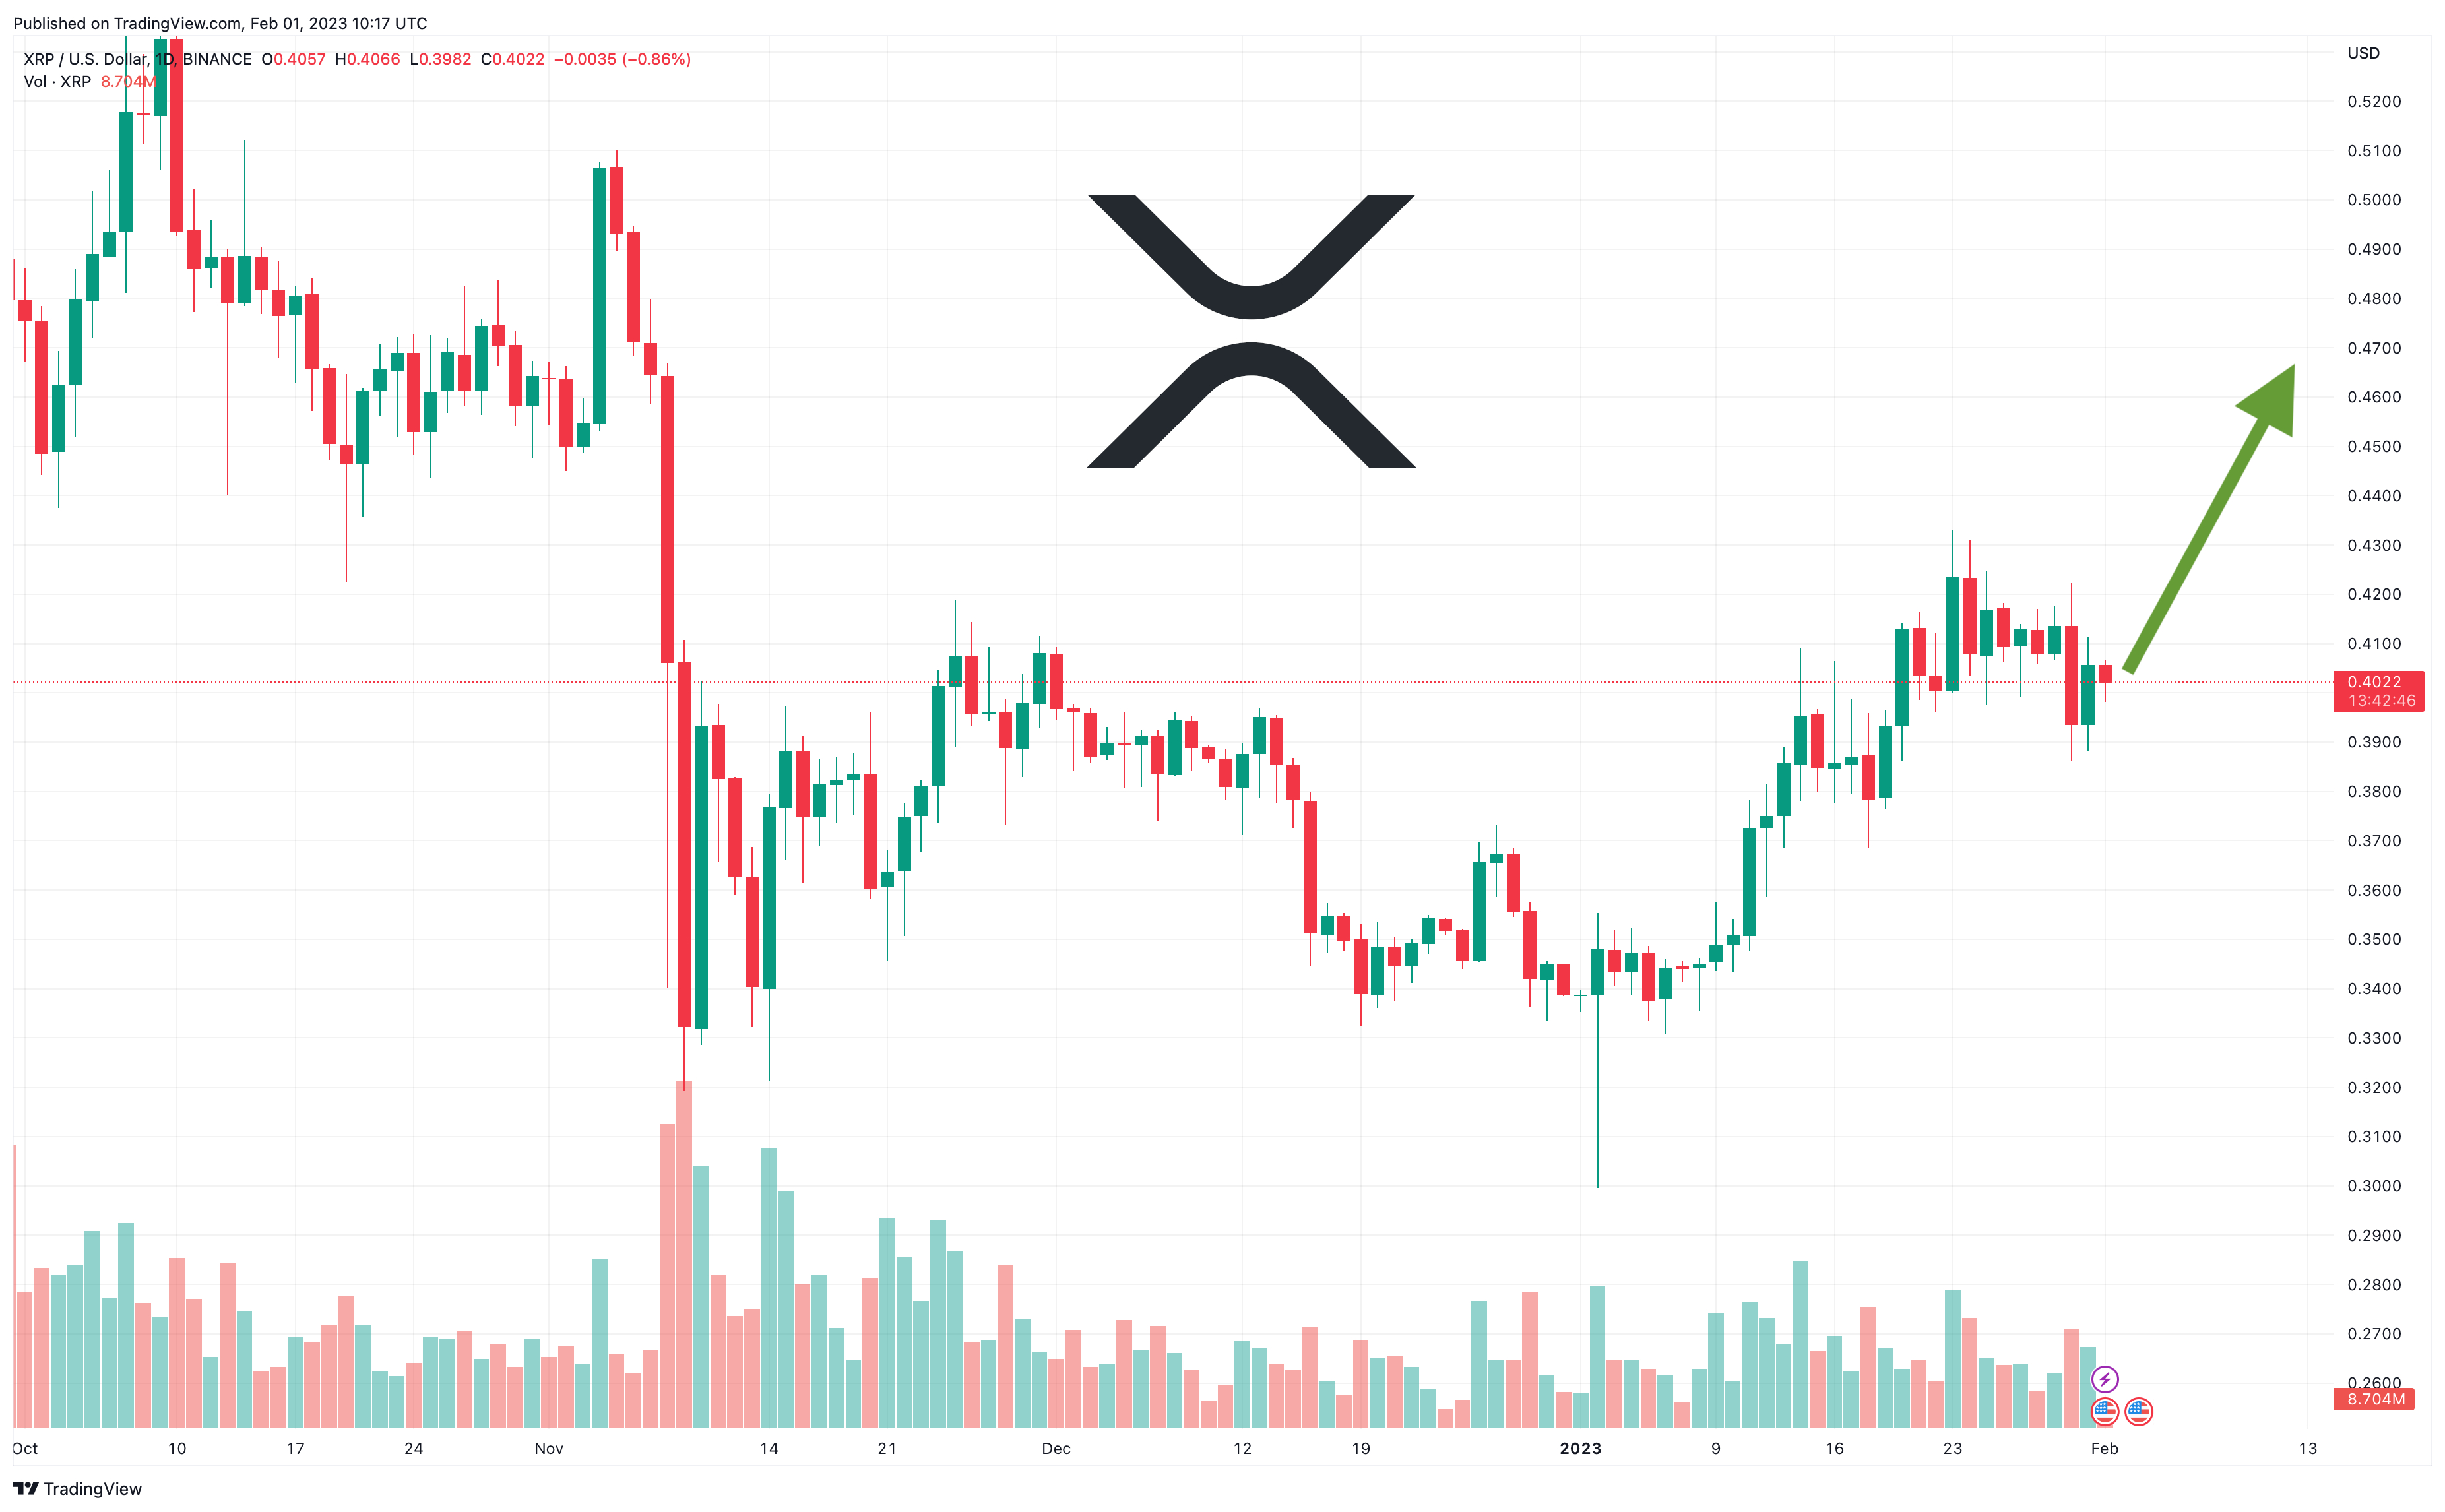 XRP Price Prediction as Ripple On-Demand  Product Surpasses $200  Million XRP Tokens Sold – XRP Pump Incoming?